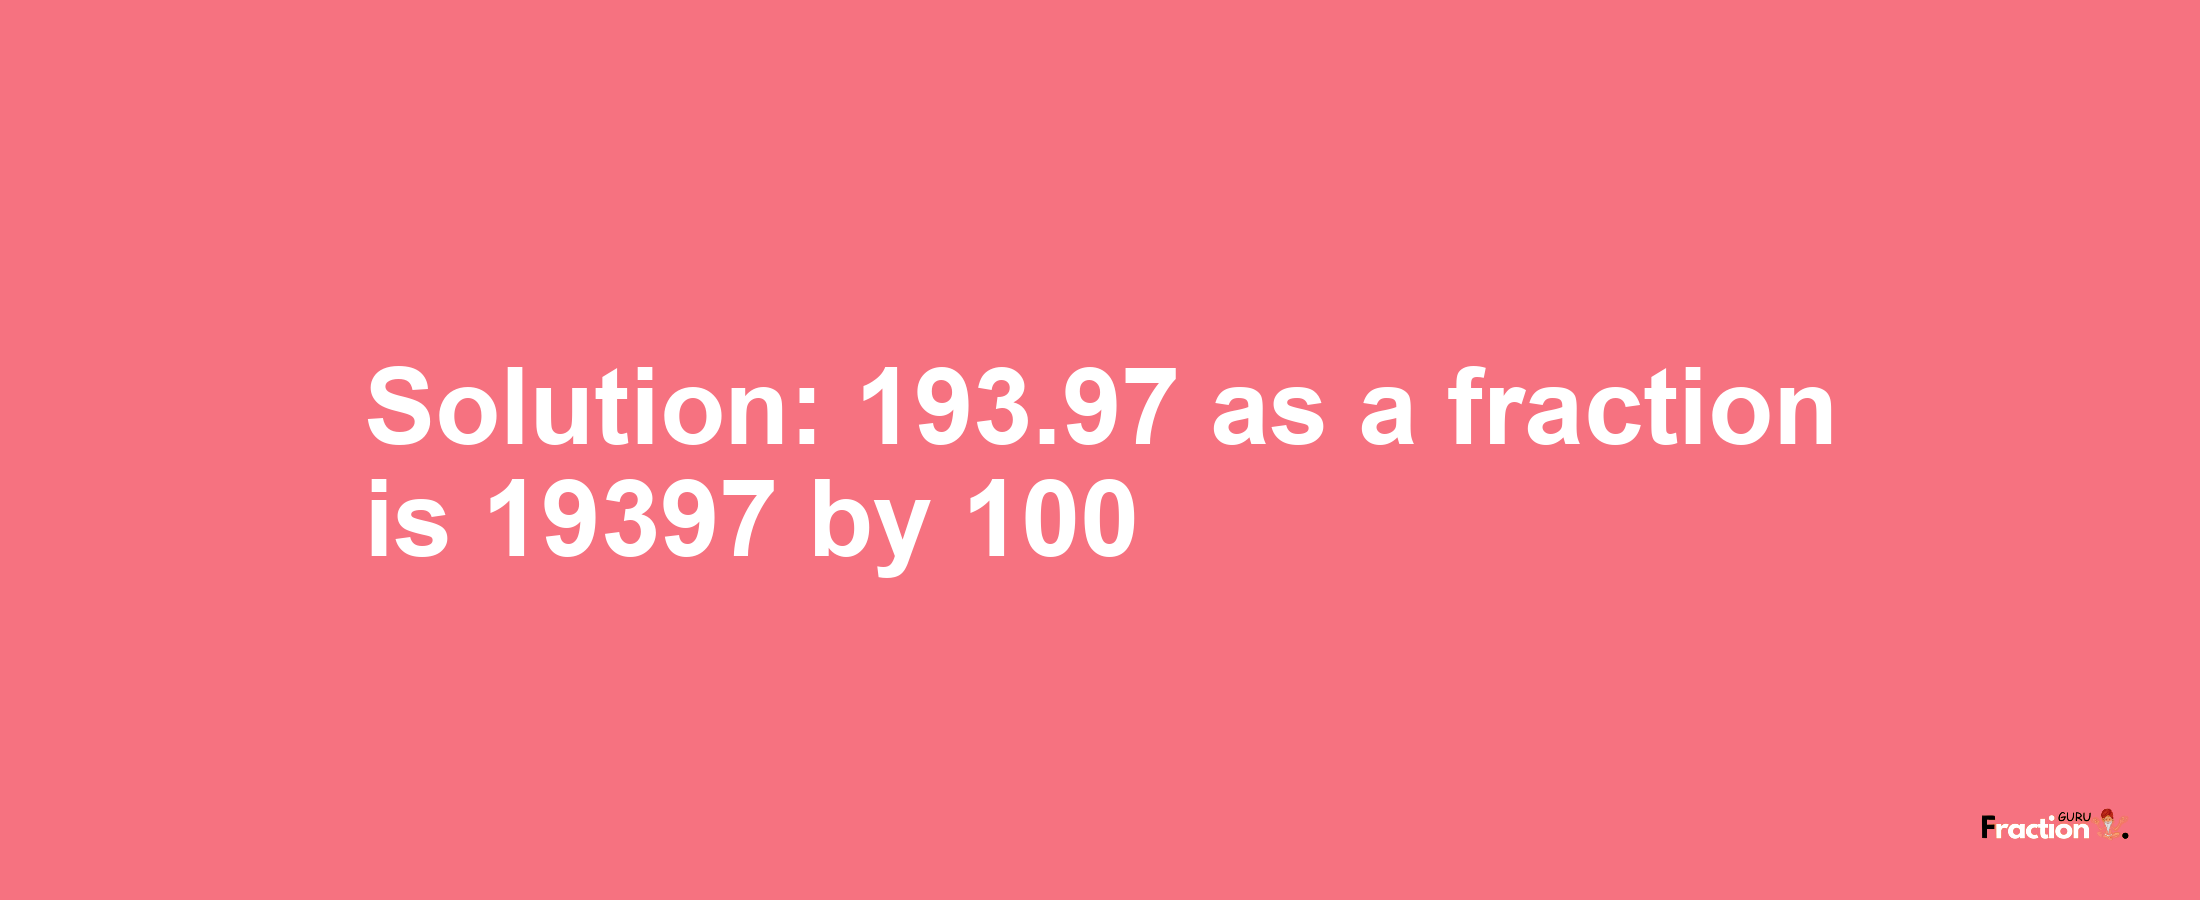 Solution:193.97 as a fraction is 19397/100